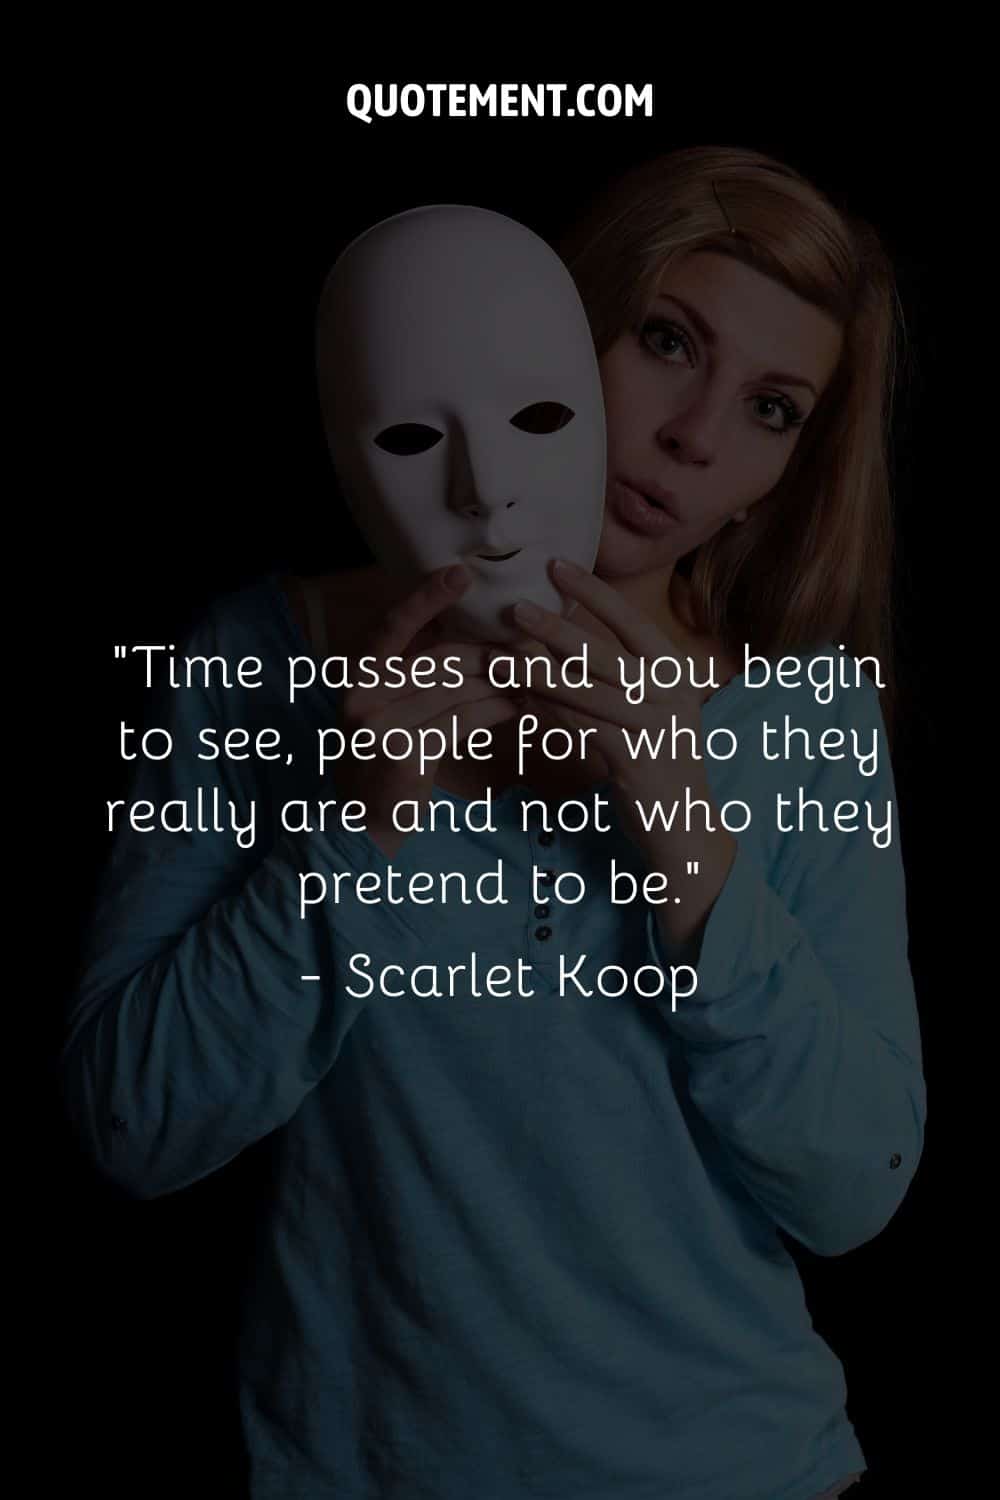 “Time passes and you begin to see, people for who they really are and not who they pretend to be.” — Scarlet Koop